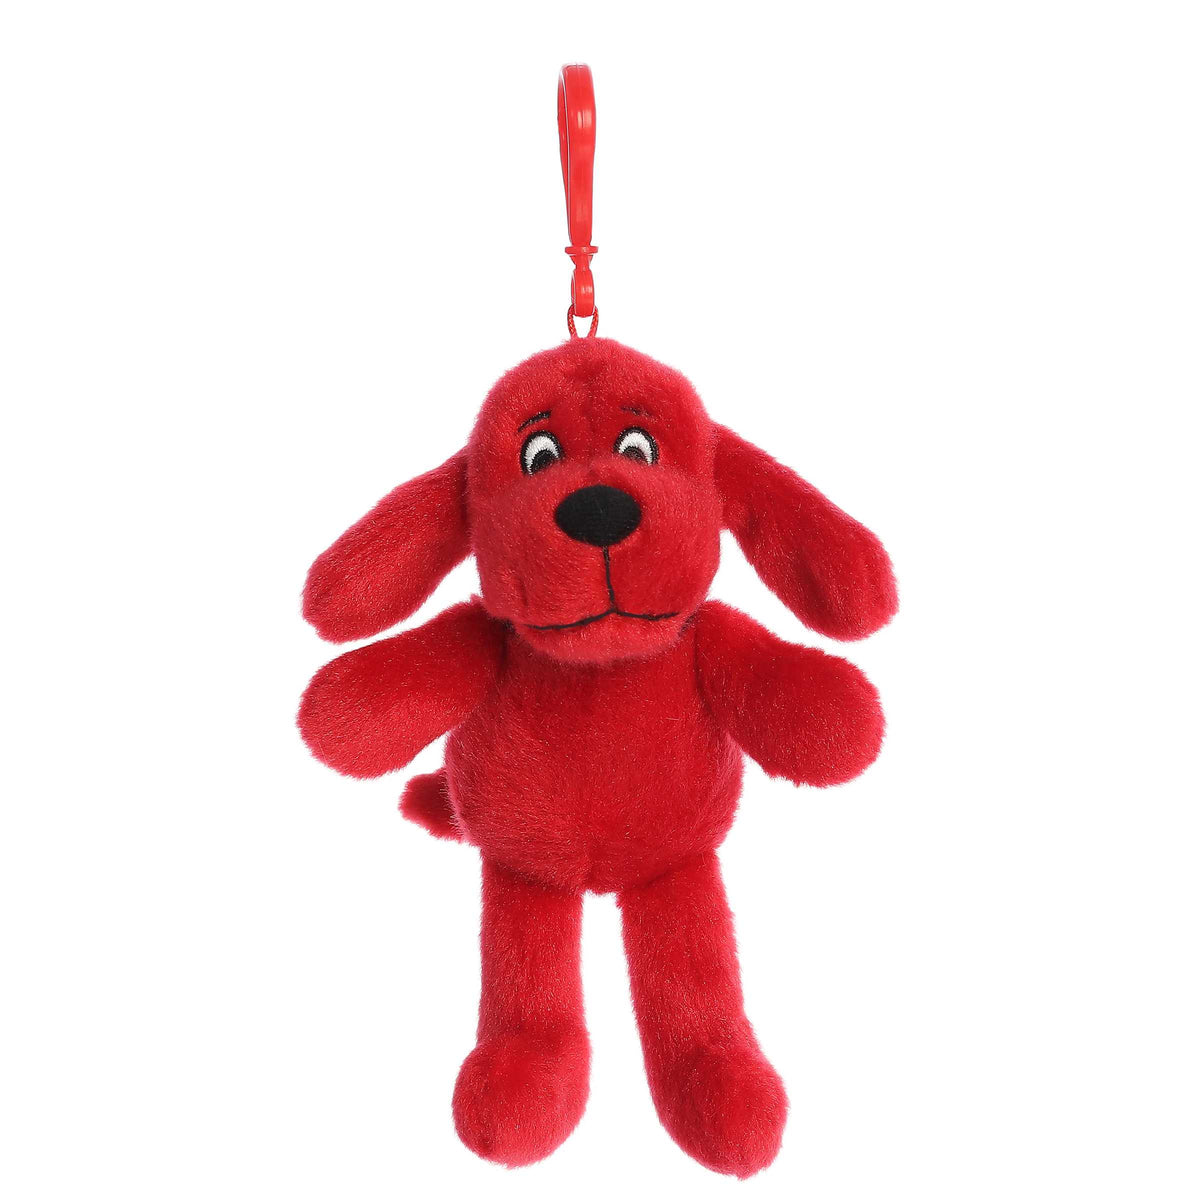 Clifford Clip-On' plush keychain, soft and red, featuring Clifford's friendly face, perfect for adding to backpacks or keys.